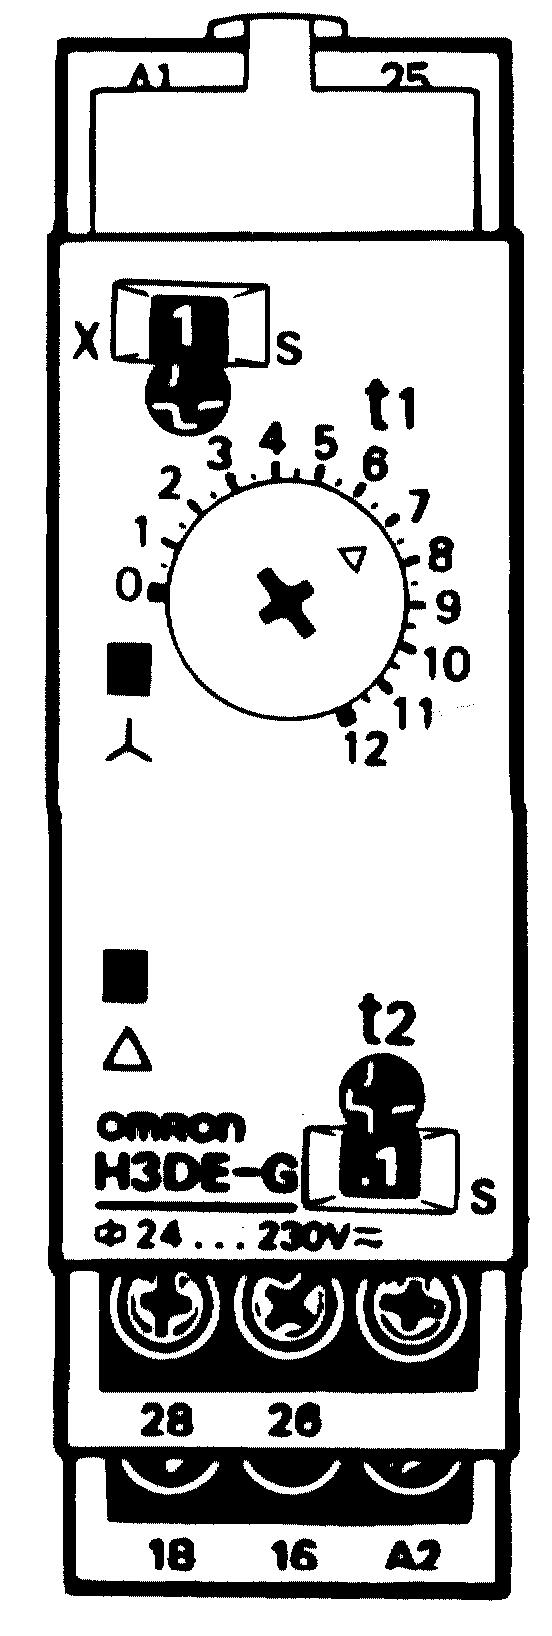 The star operation time scale selector on the upper-left side of the front panel can be set to 1 or 10 as a magnification.